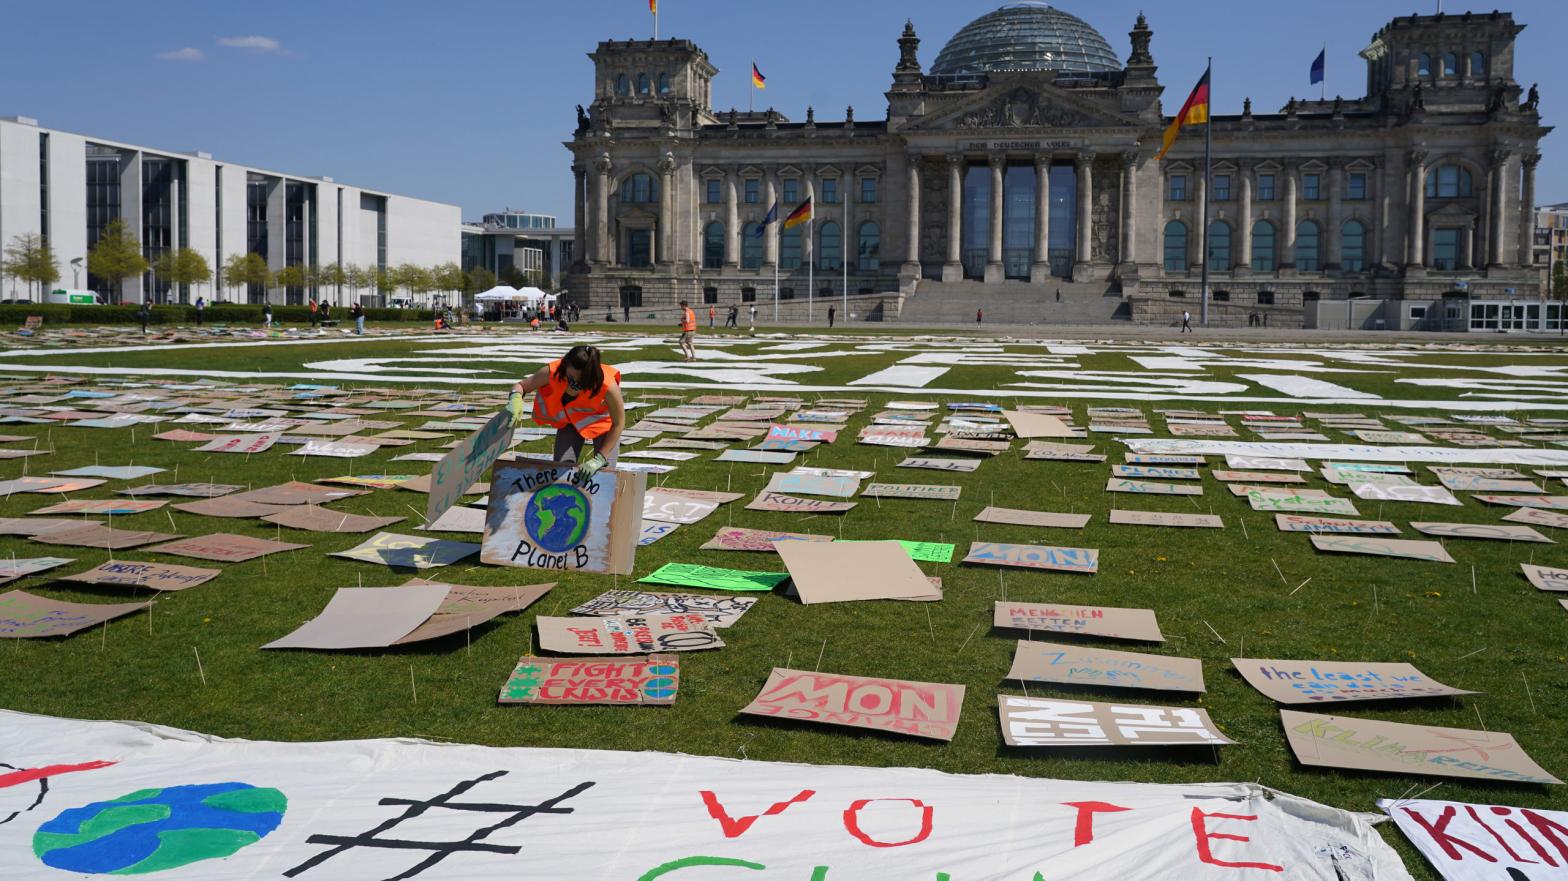 Activists with Greta Thunberg's Fridays for Future movement stage a protest for the coronavirus era outside Germany's Reichstag. (Photo: Sean Gallup, Getty Images)